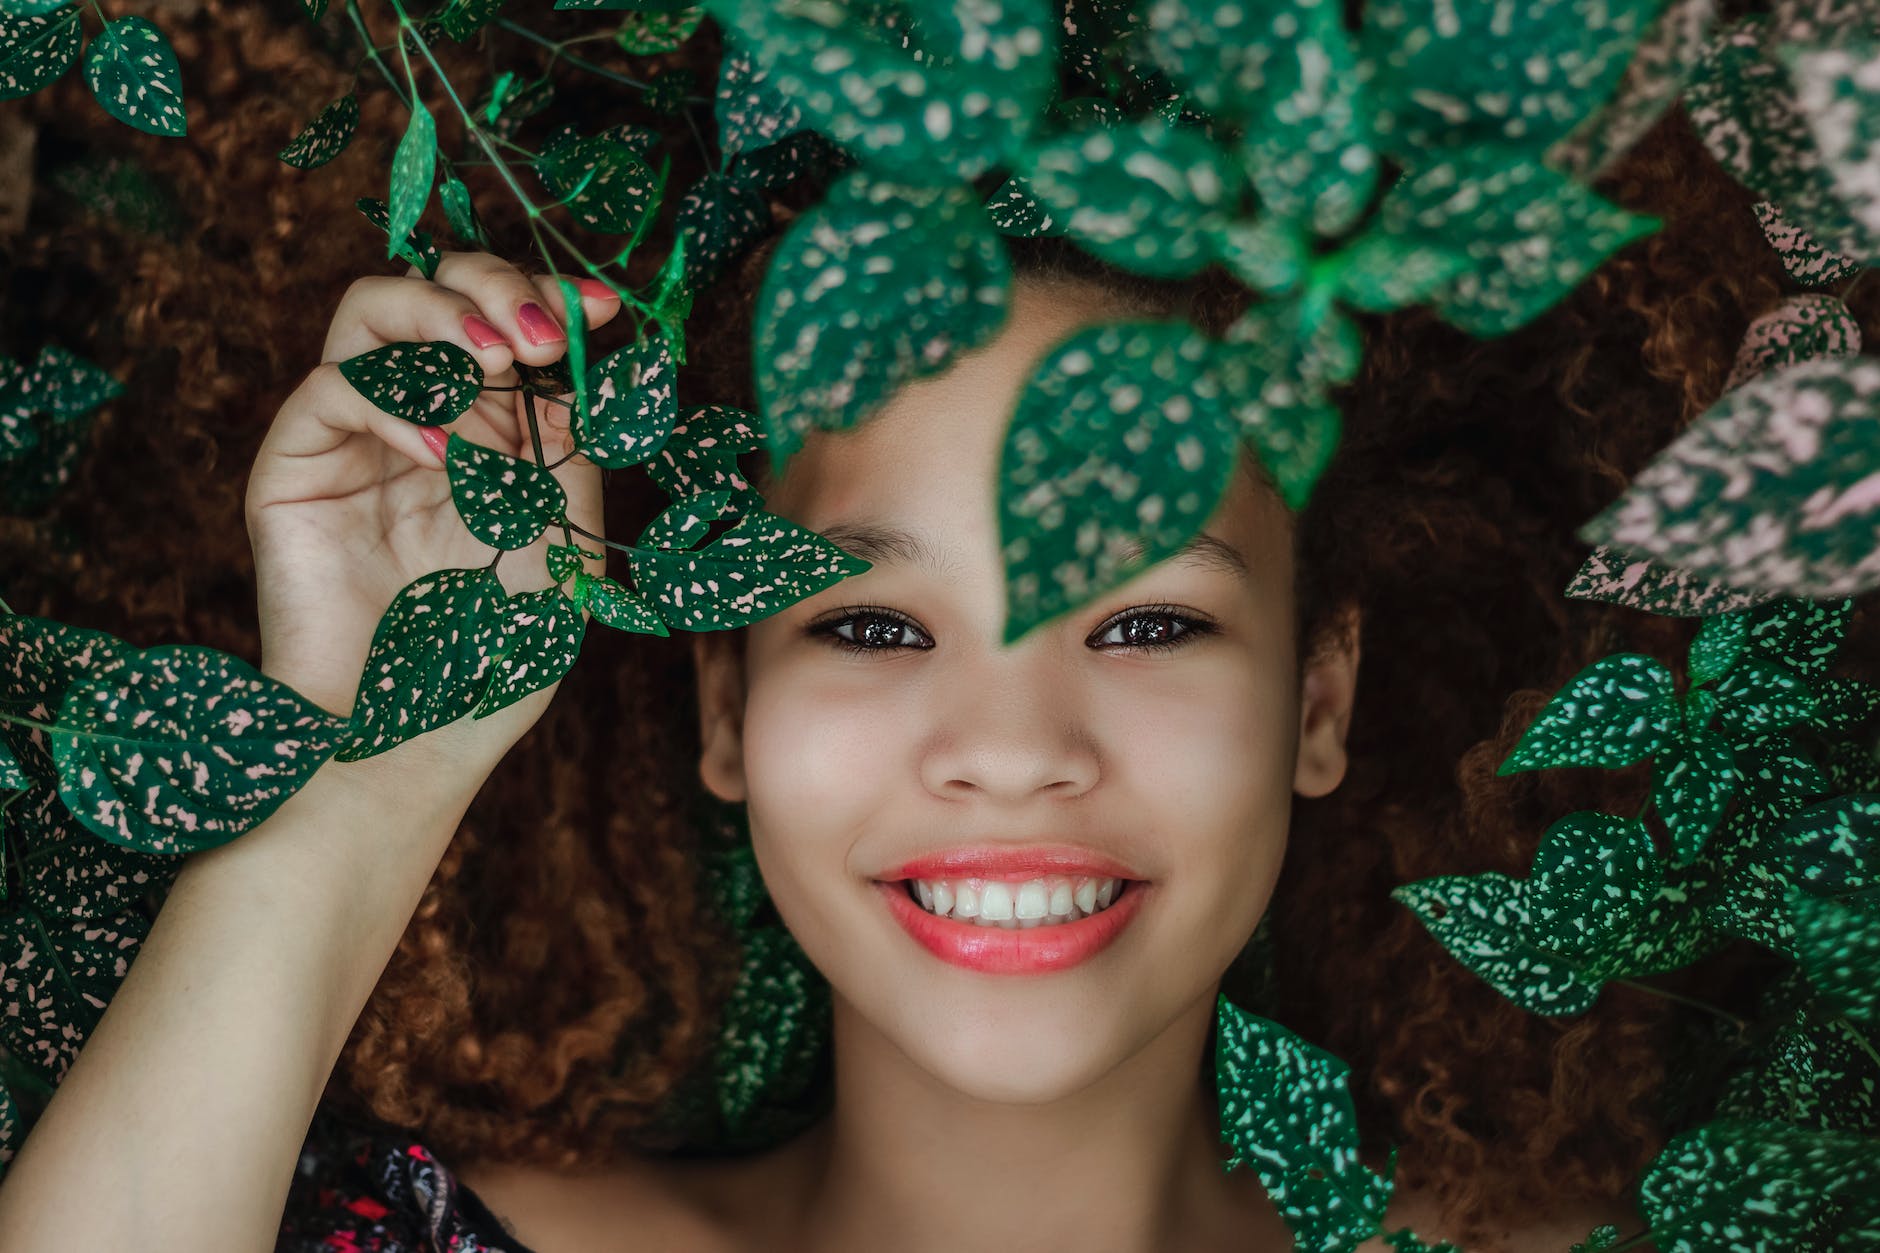 photo of woman smiling near leaves